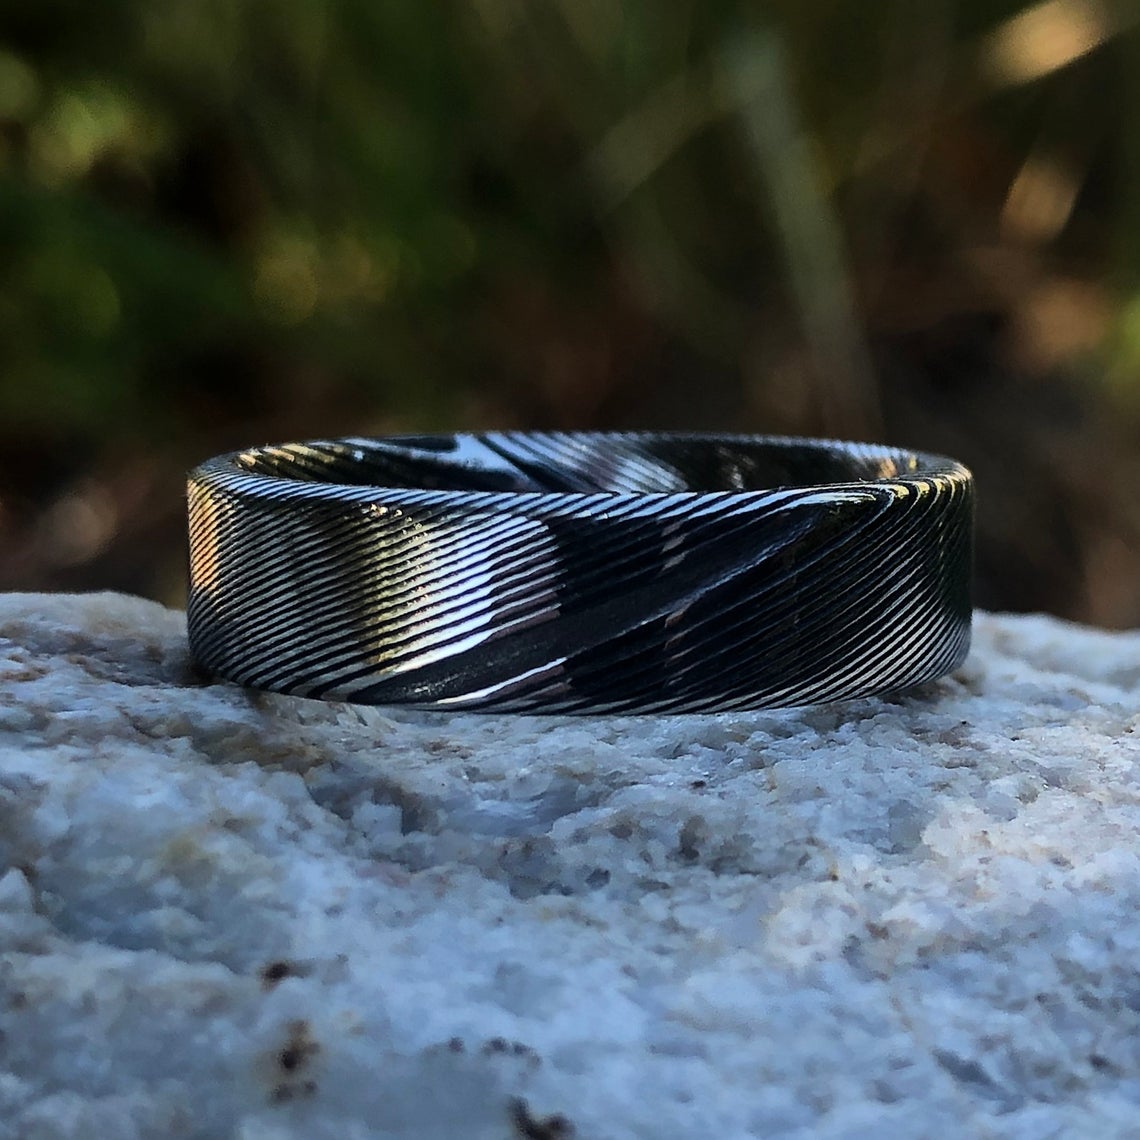 6mm wide Damascus steel wedding band with a flat profile